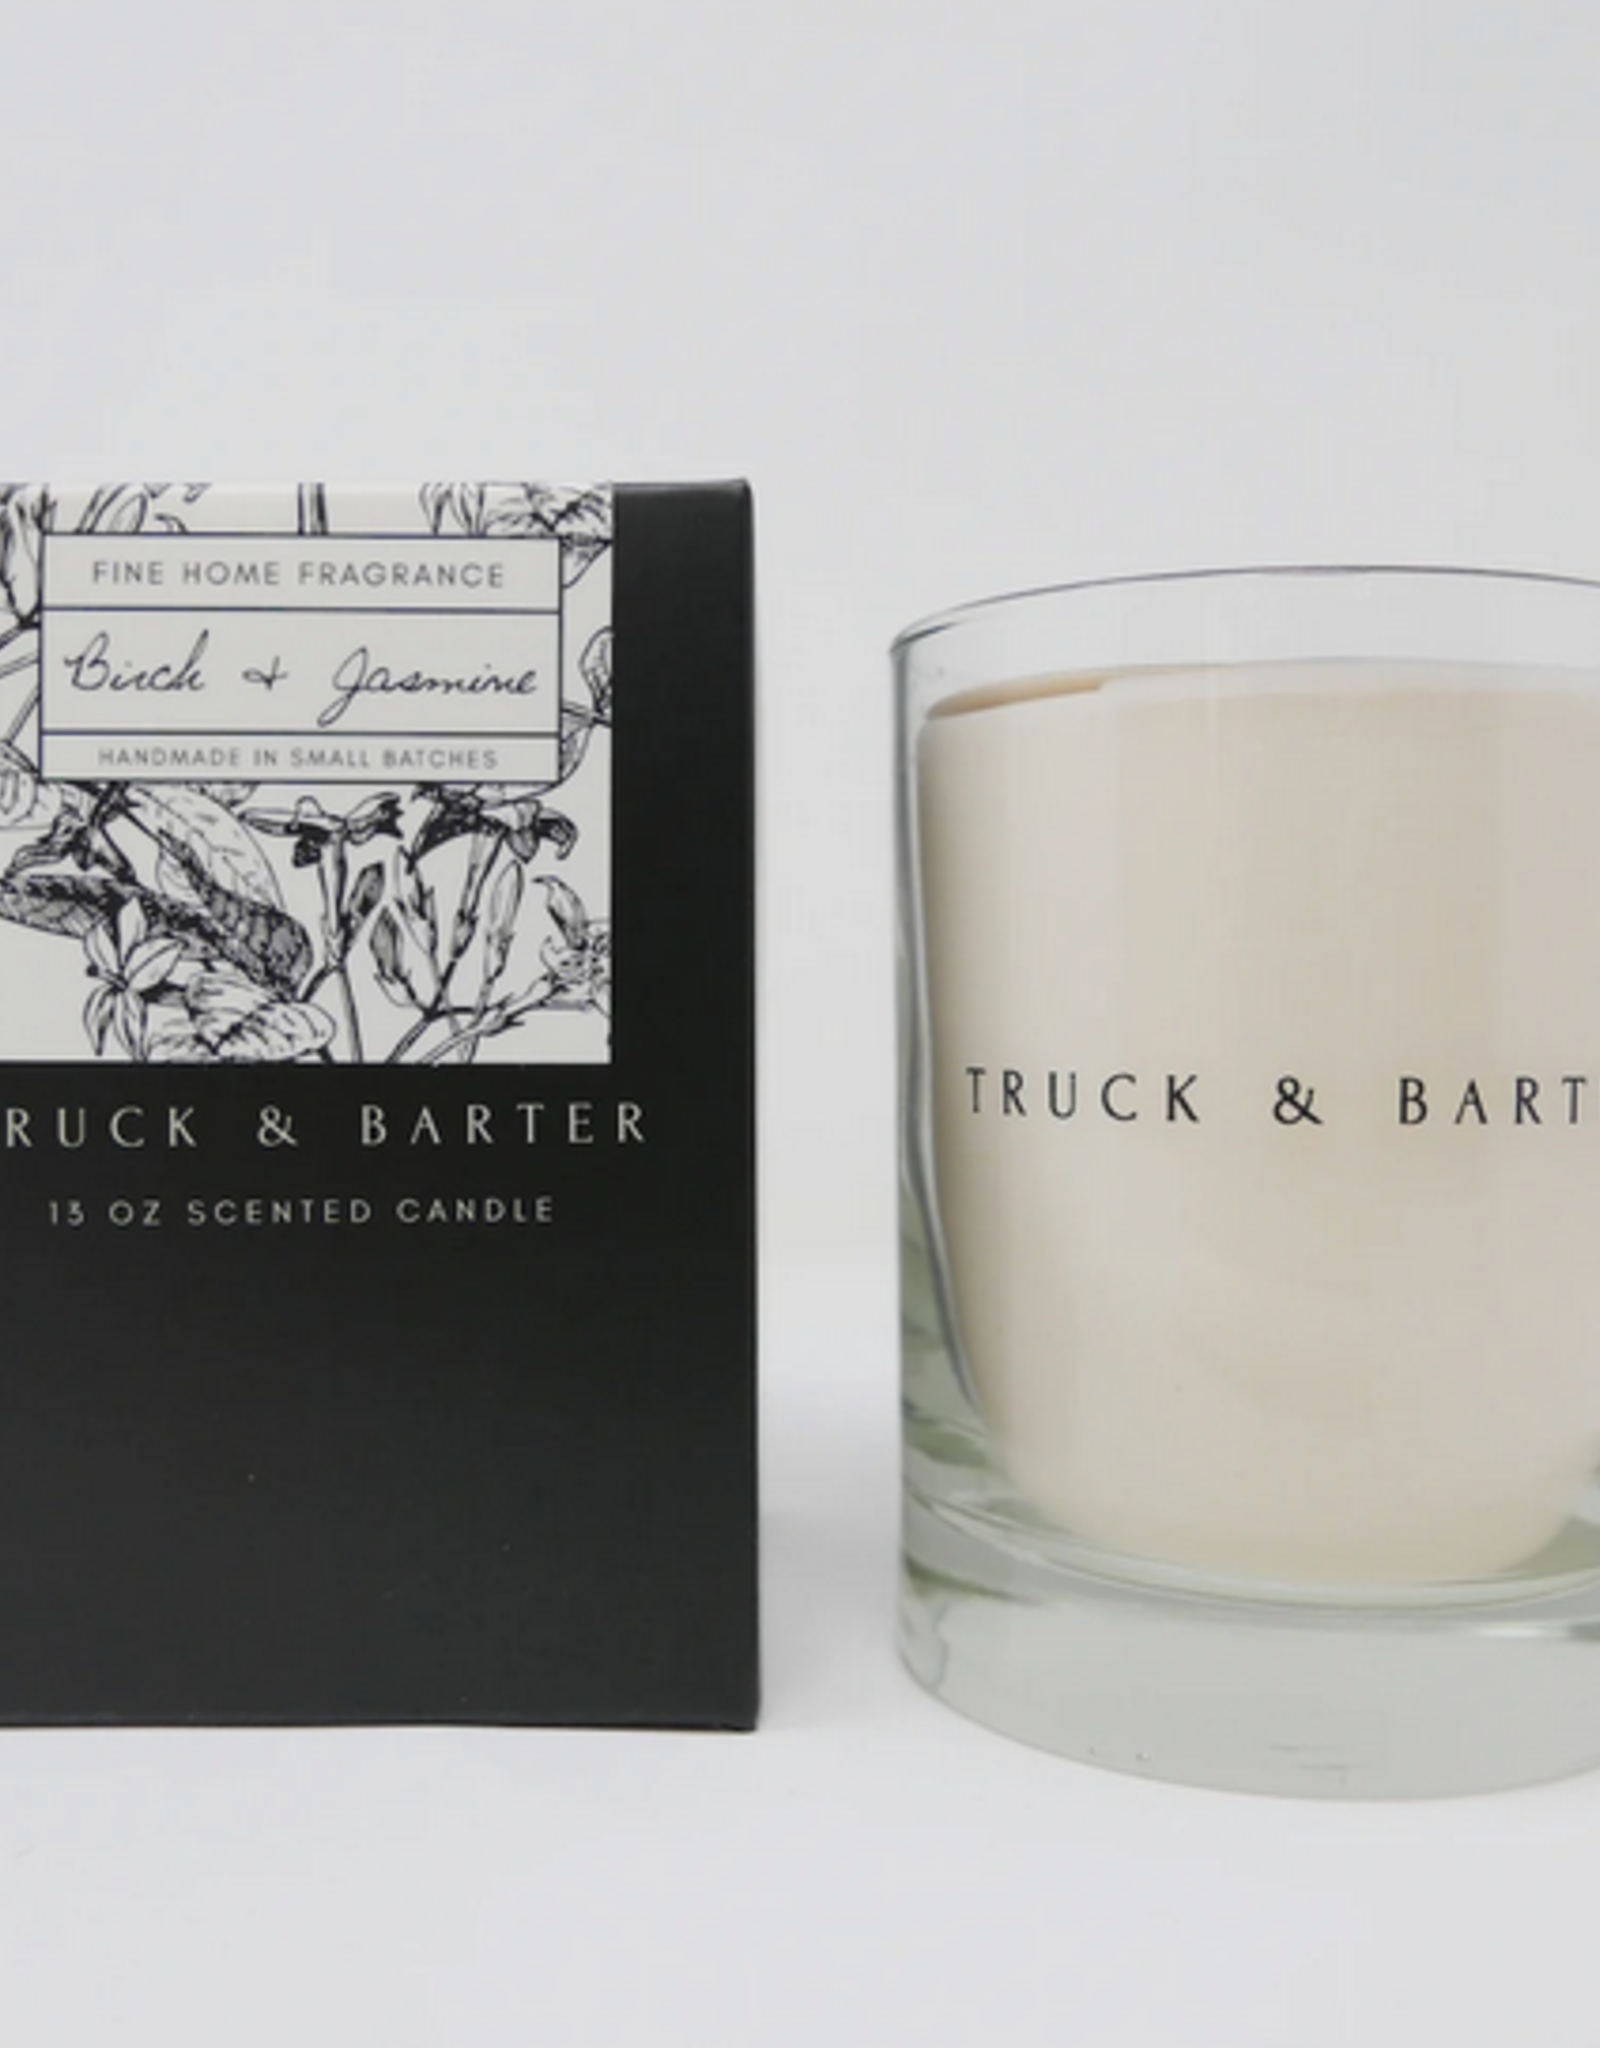 Truck & Barter Candle